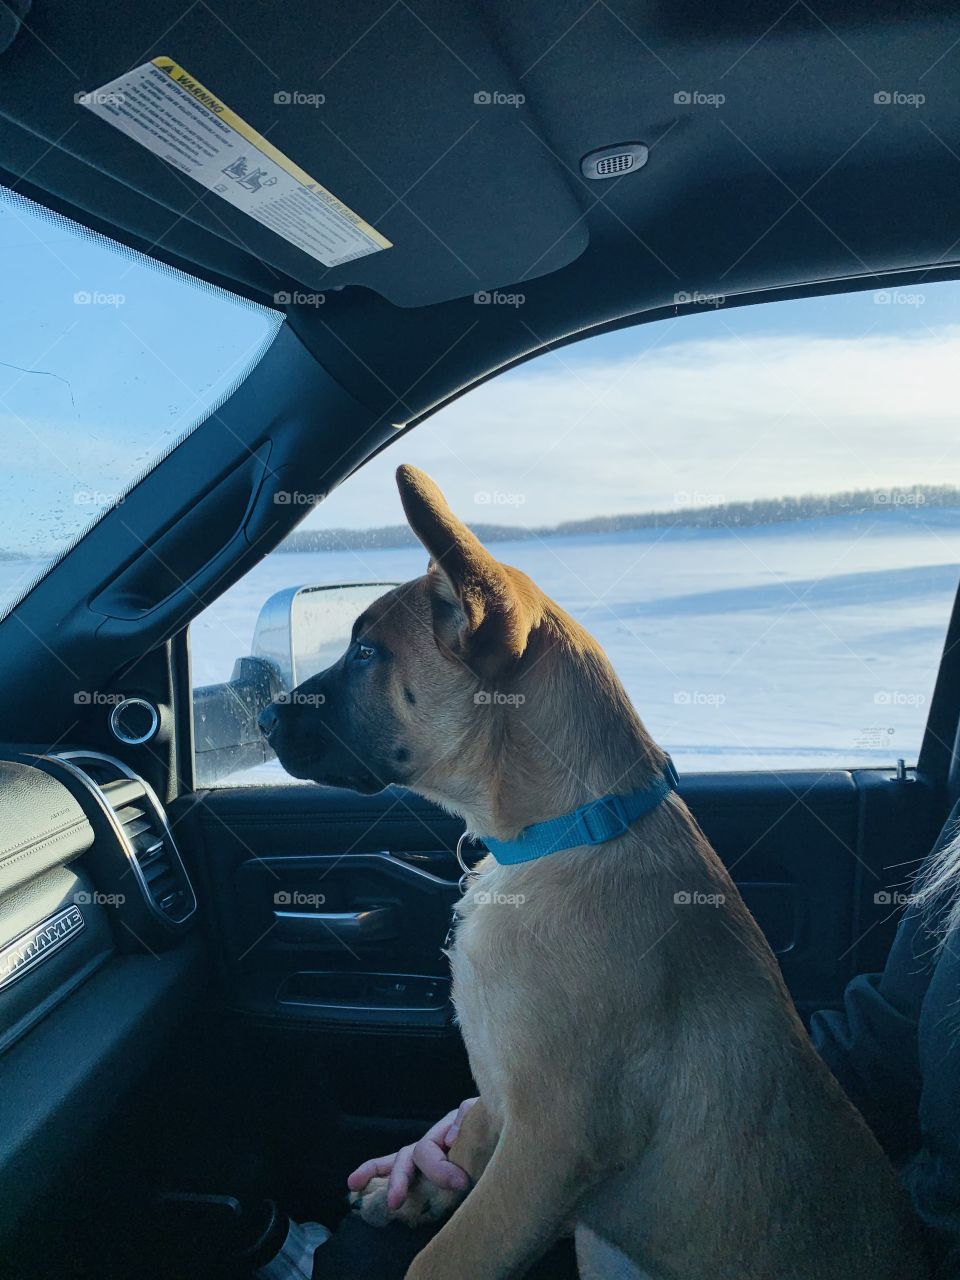 Taking the dog for a drive 